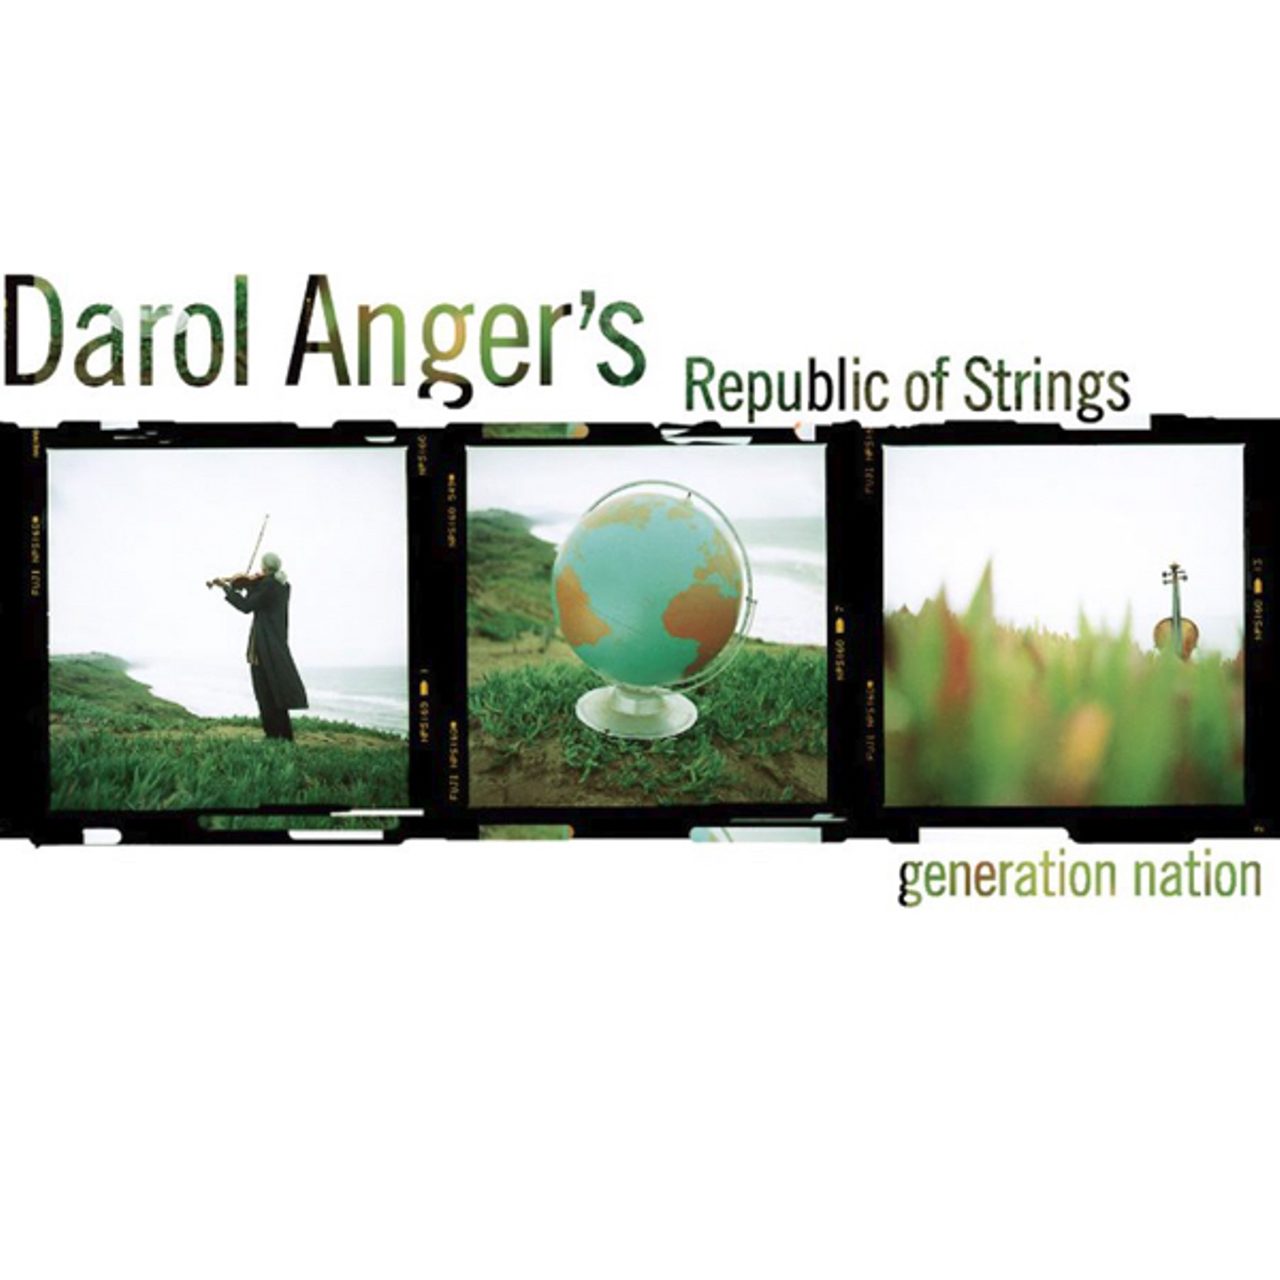 Darol Anger’s Repubblic Of Strings - Generation Nation cover album